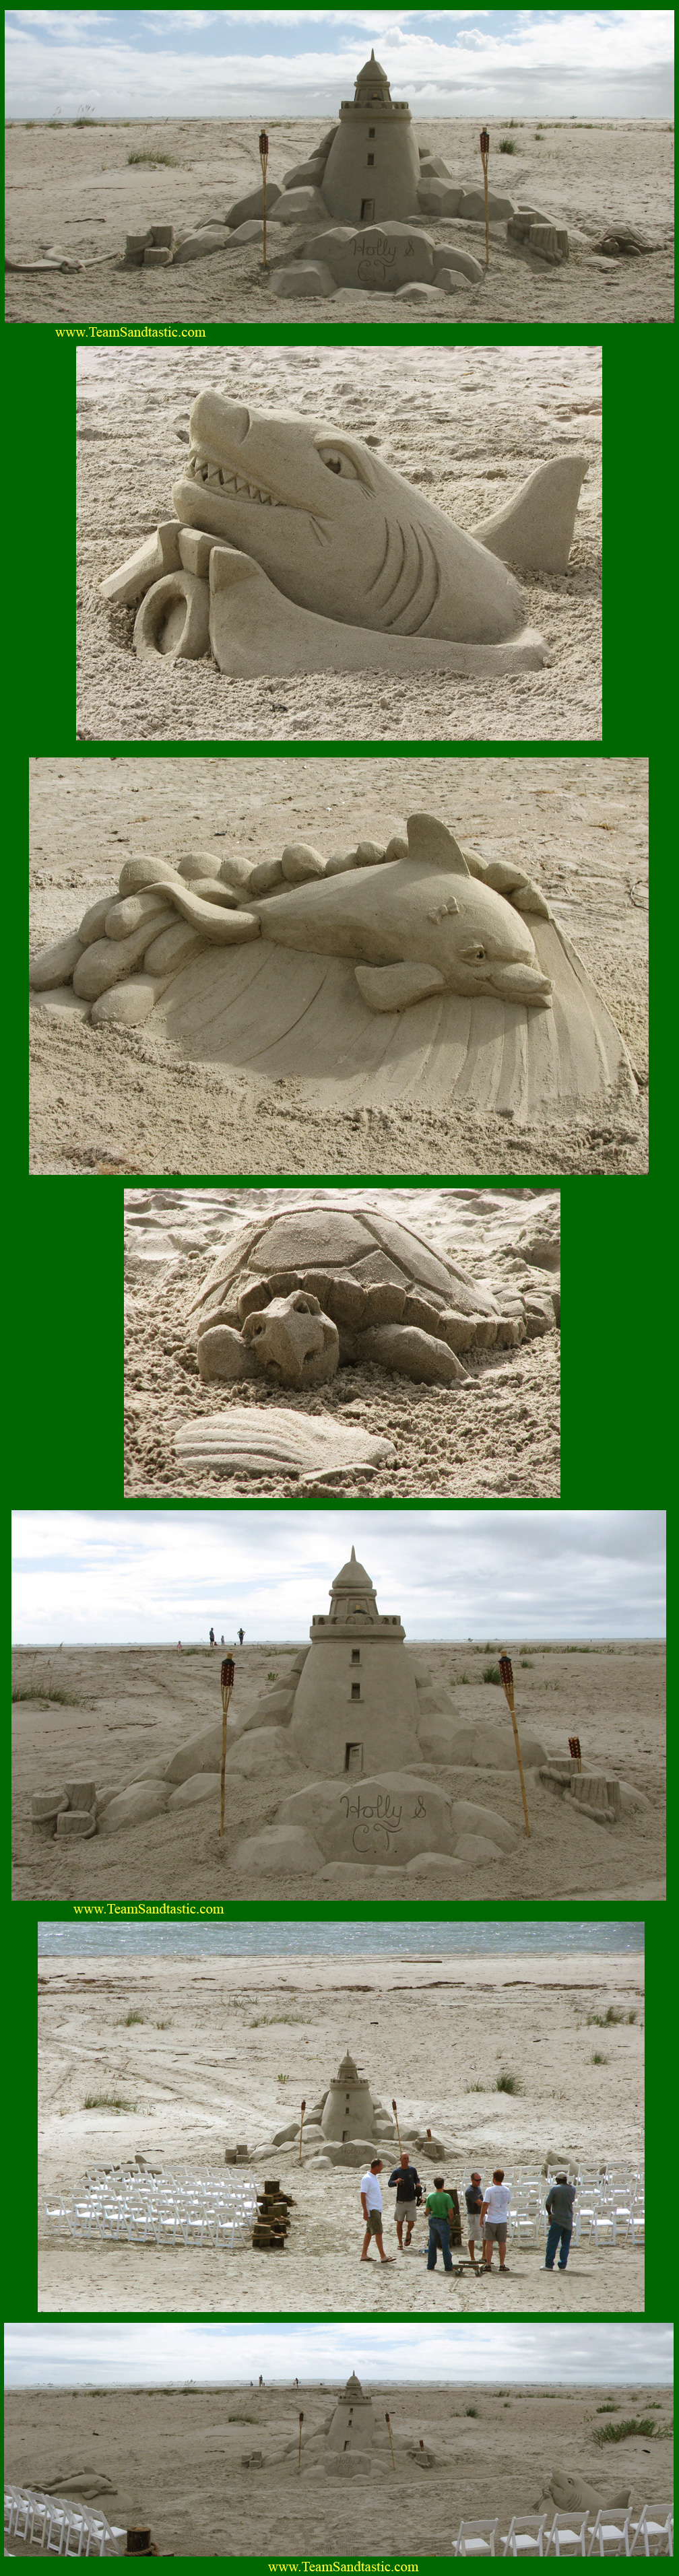 Weddings on the Beach with Sand Sculpture 